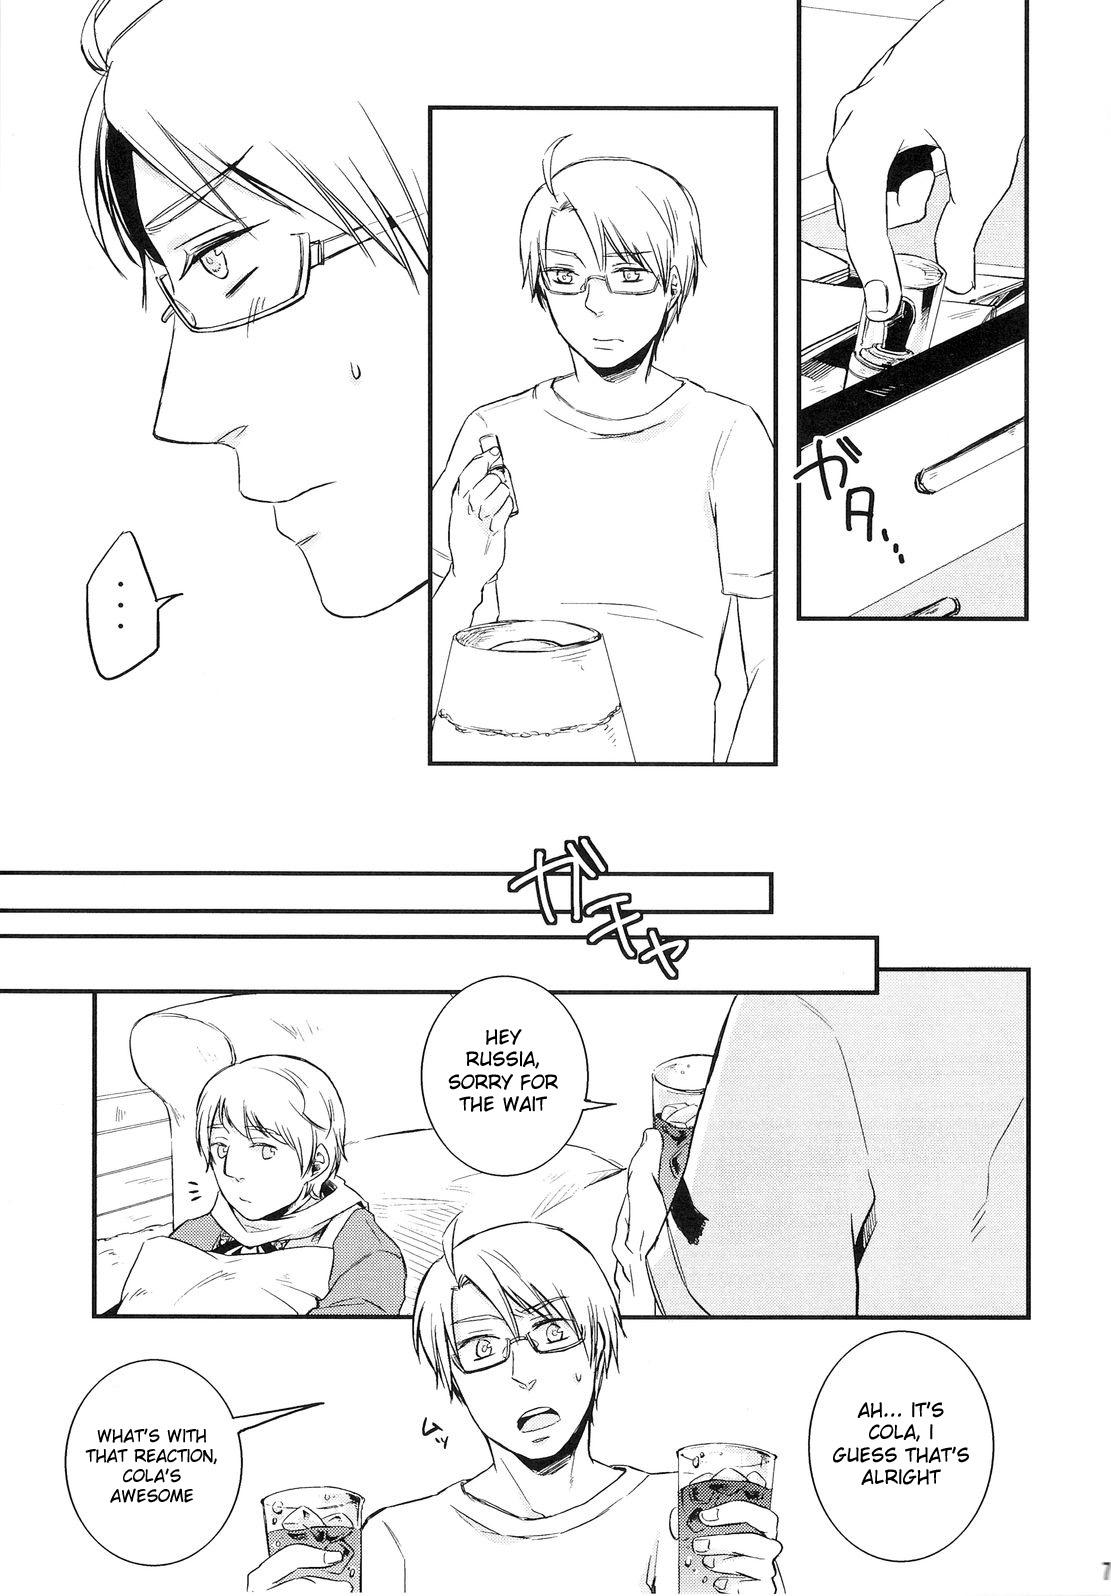 Tugging NO PROBLEM - Axis powers hetalia Oral Sex - Page 6